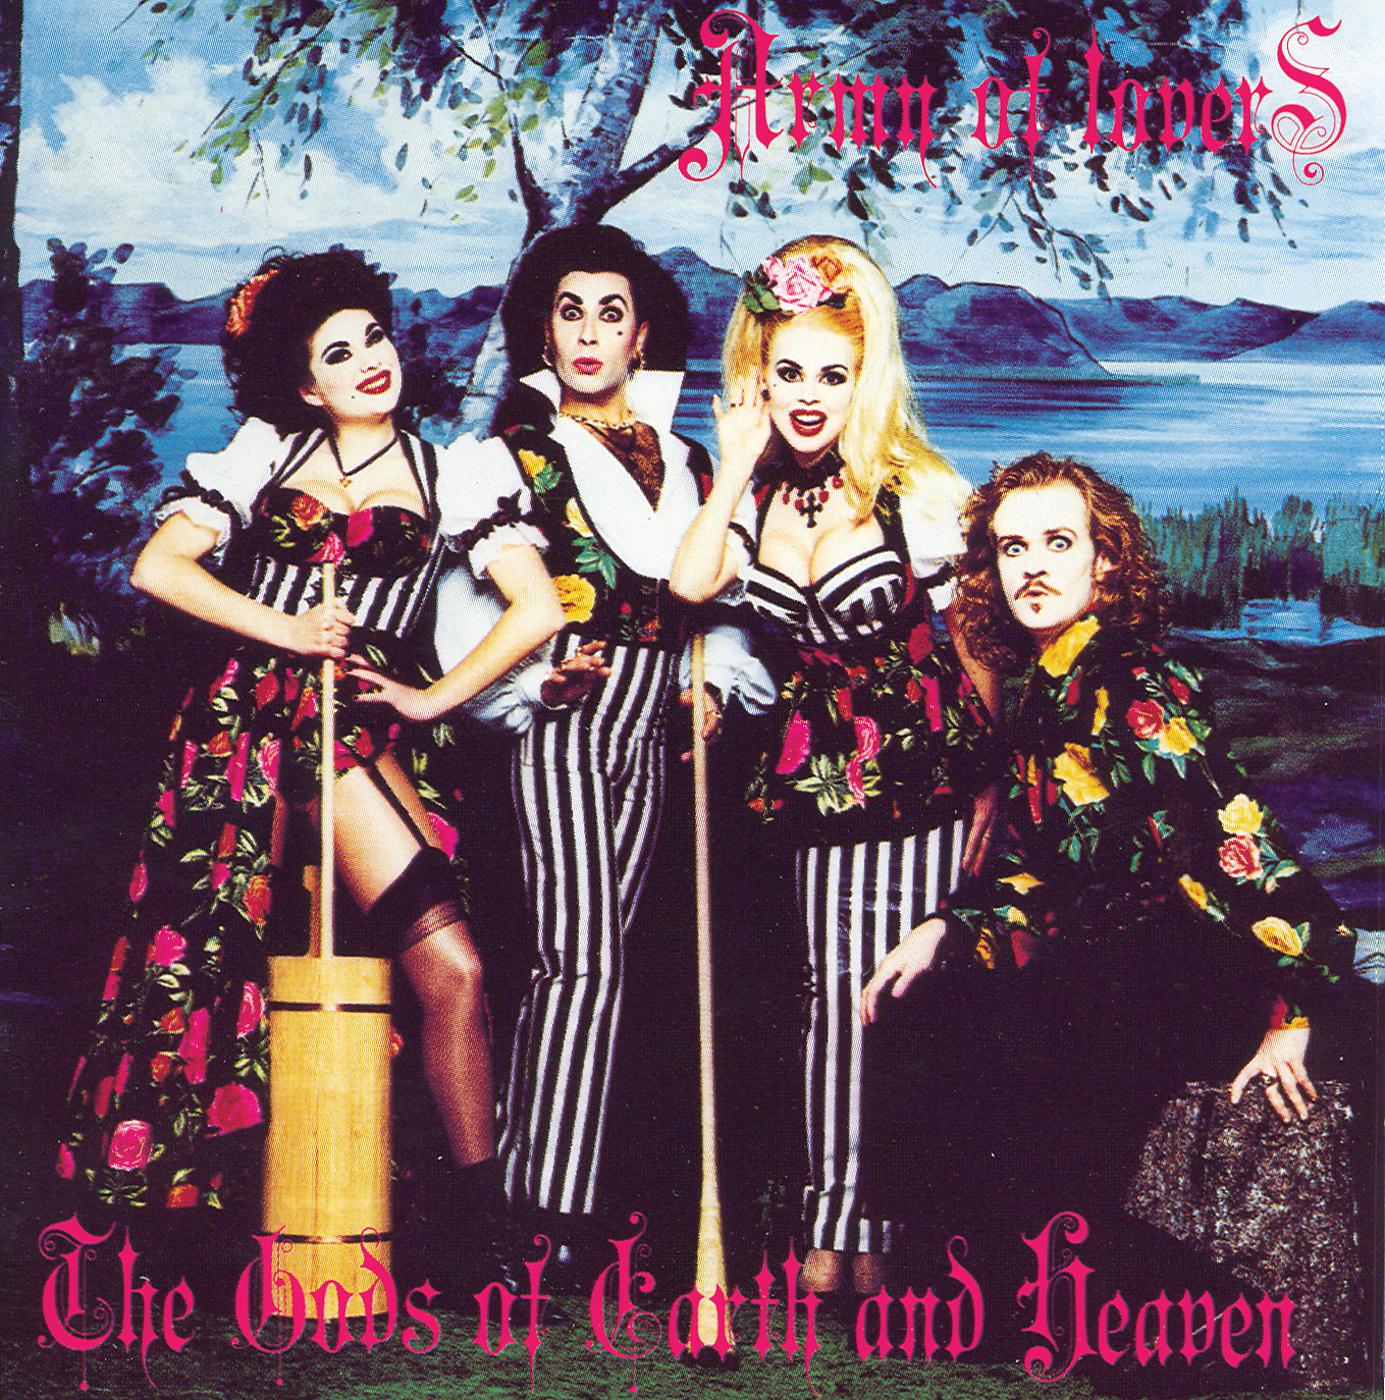 Israelism. Army of lovers the Gods of Earth and Heaven 1993. Группа Army of lovers. Army of lovers album the Gods of Earth and Heaven. Army of lovers 1993.